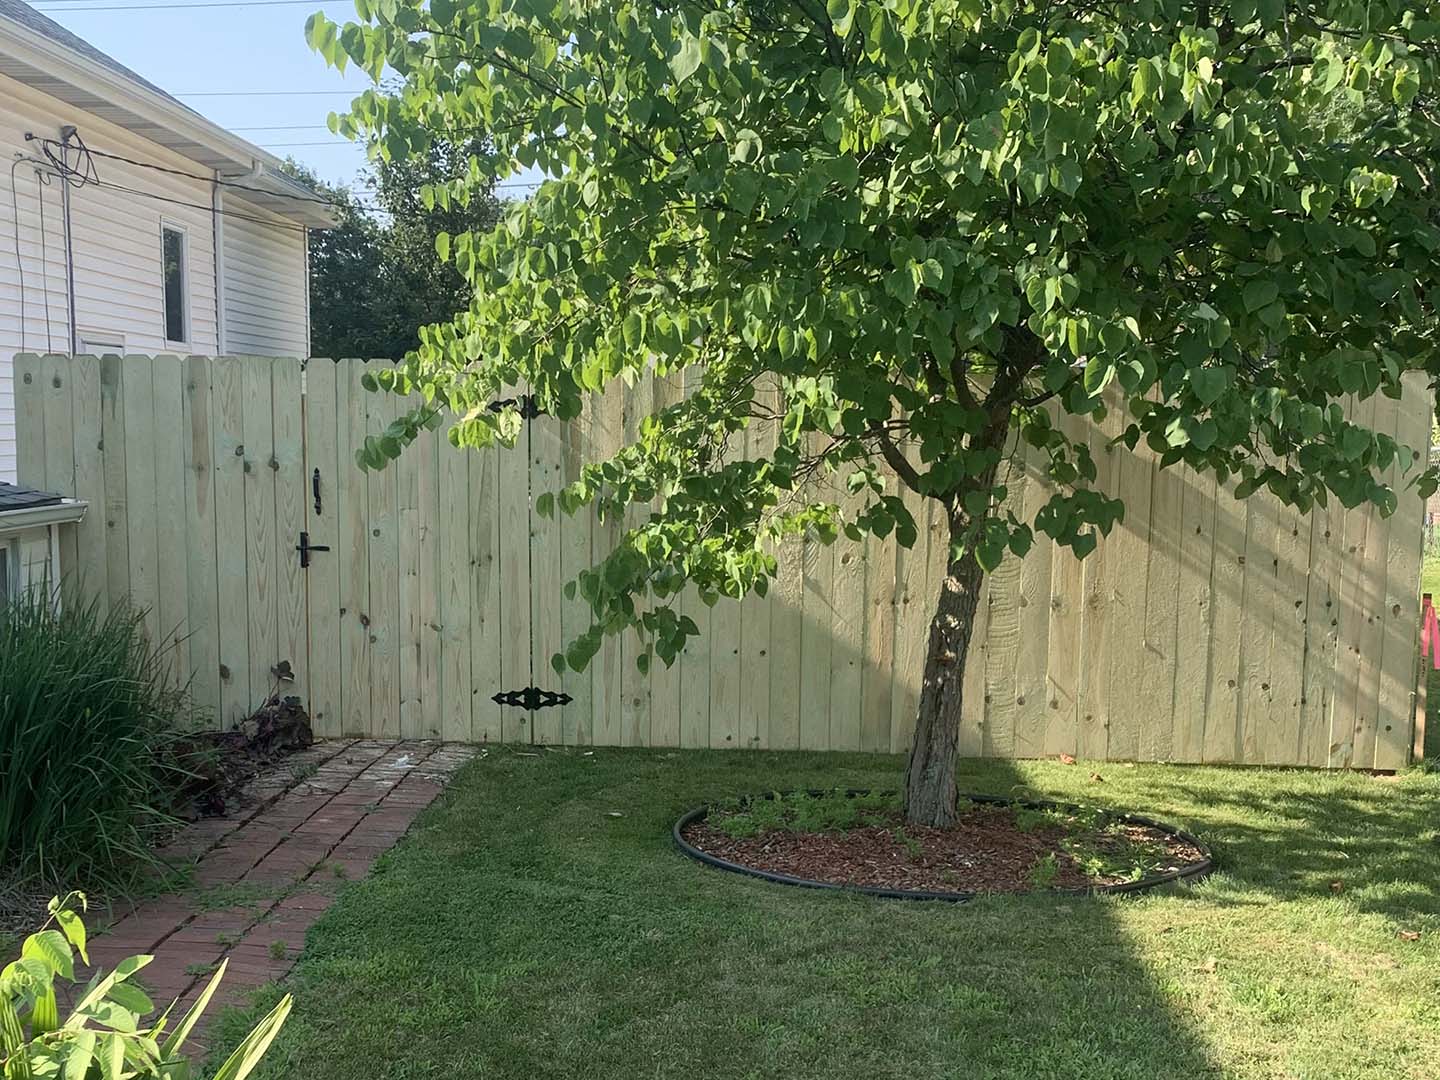 Photo of a wood privacy fence in Northern Indiana.